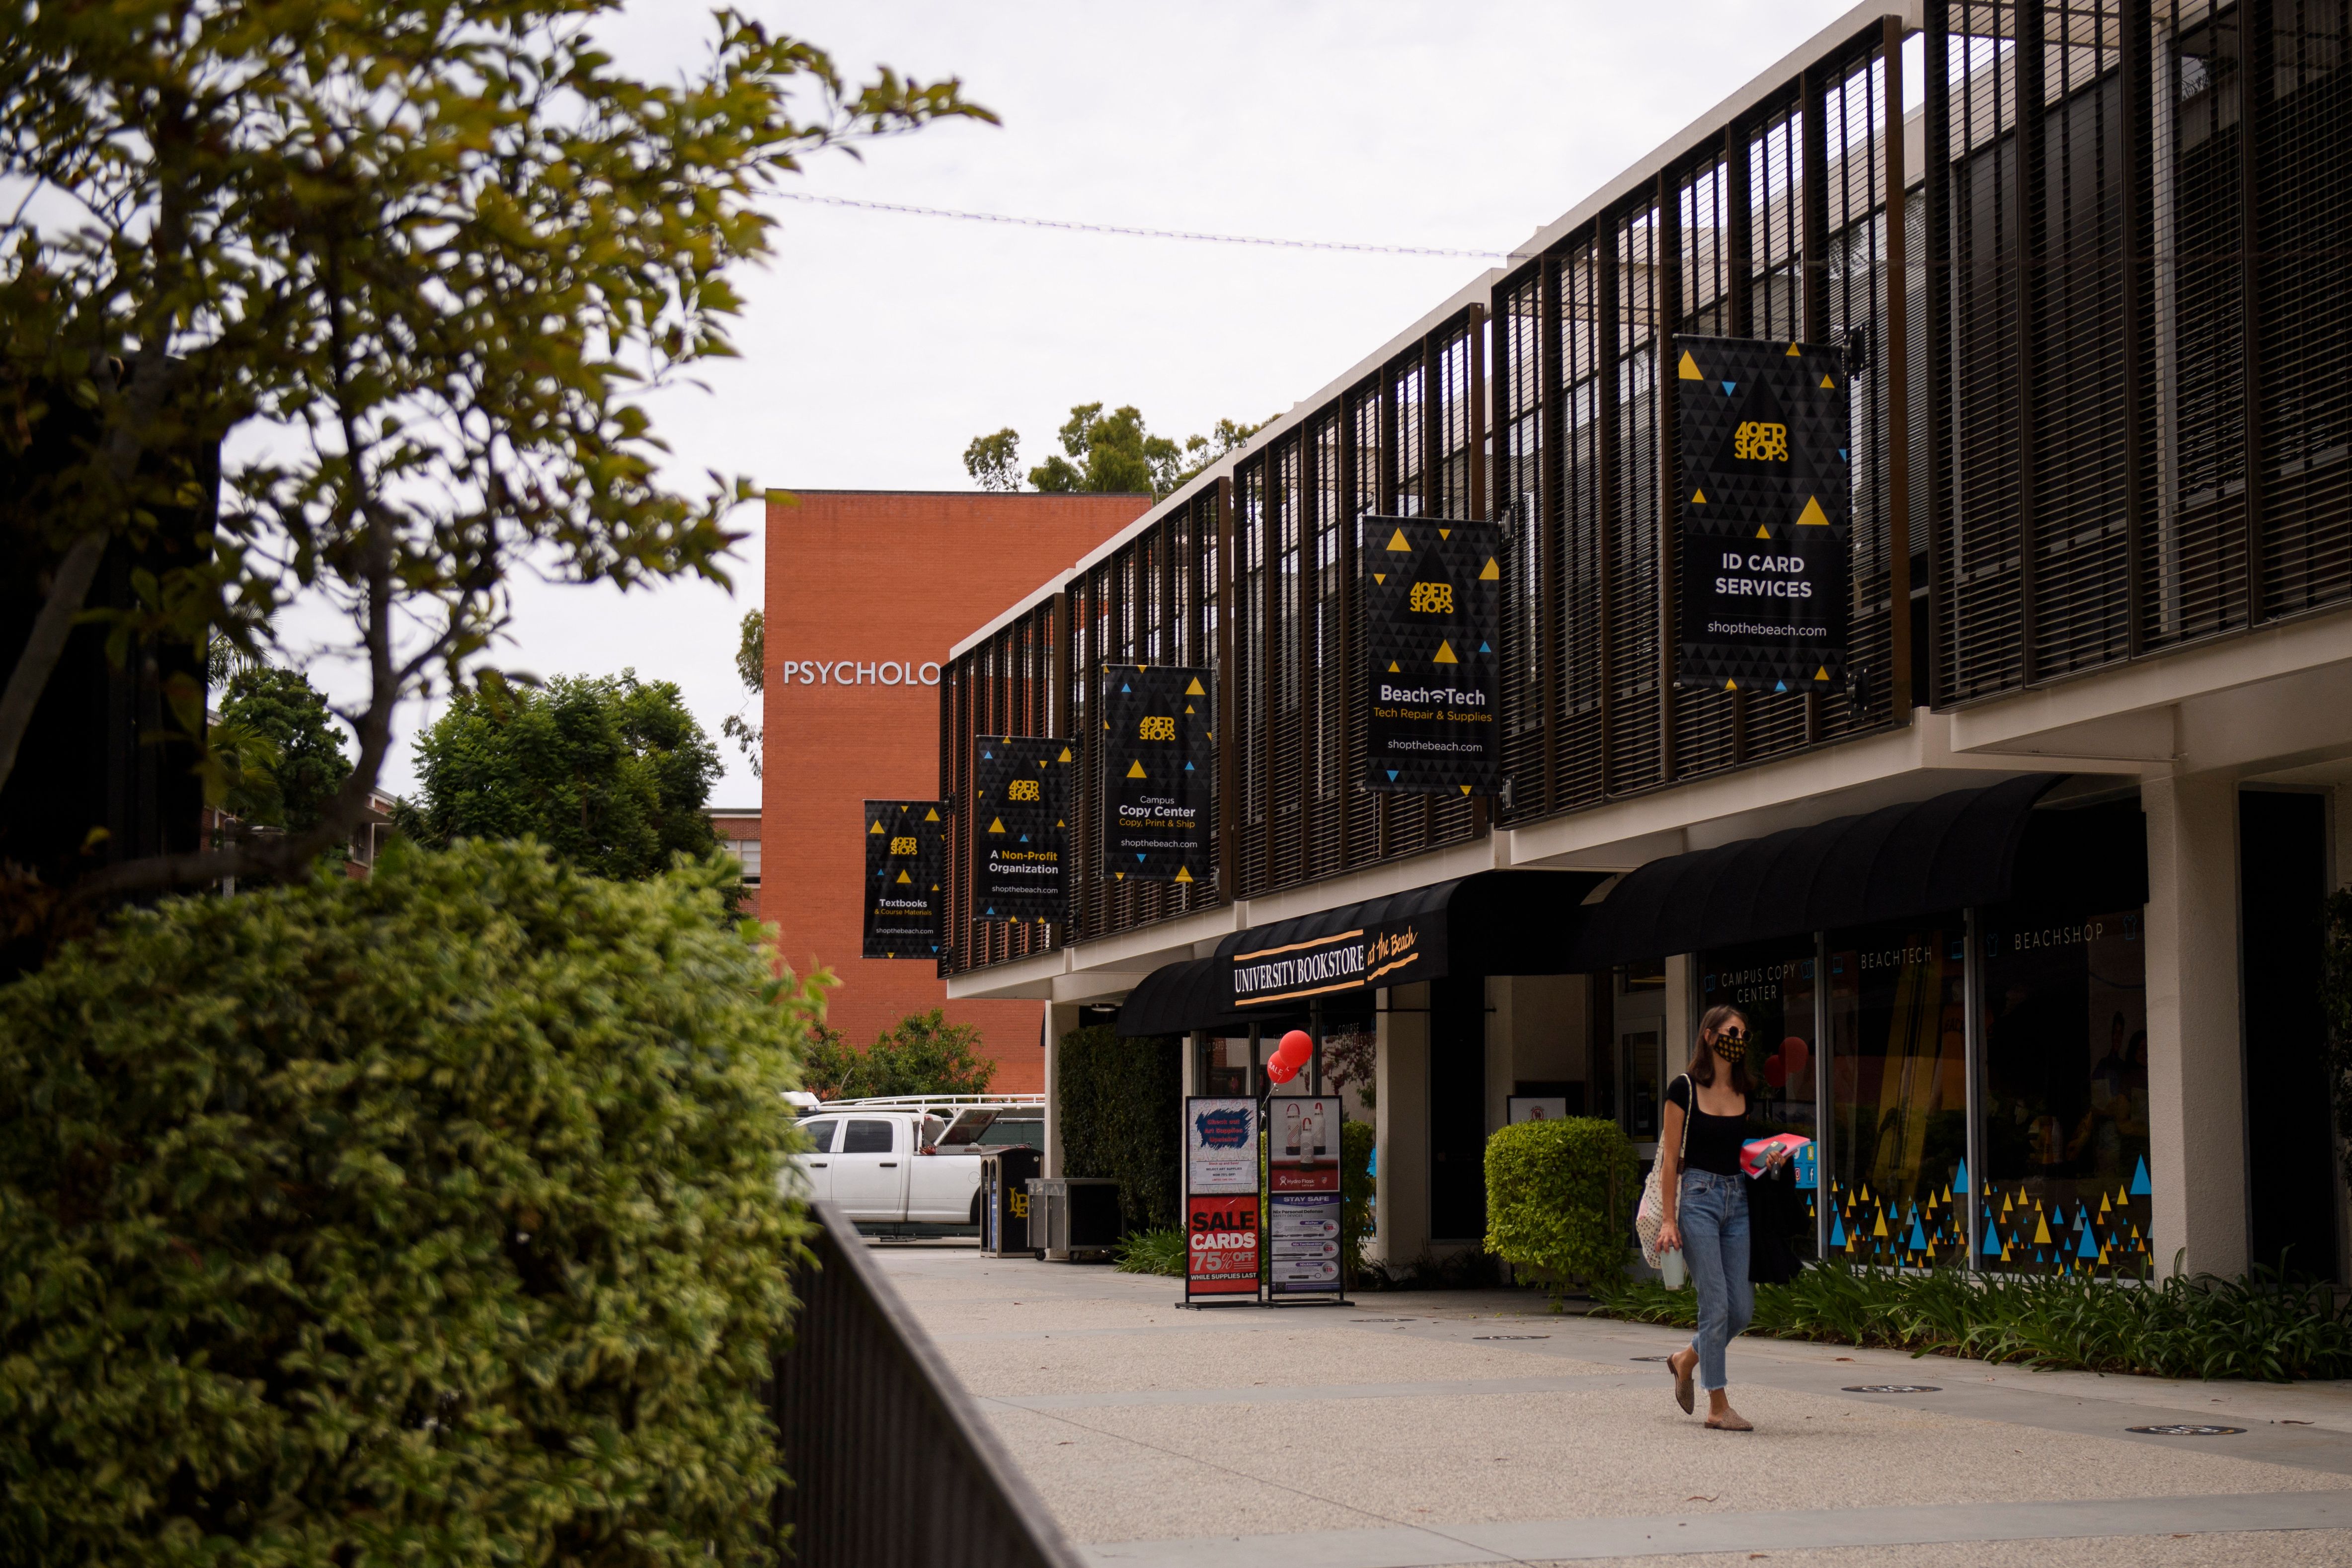 File: A person wears a face mask as they walk past the University Bookstore at the California State University Long Beach (CSULB) campus on 11 August 2021 in Long Beach, California